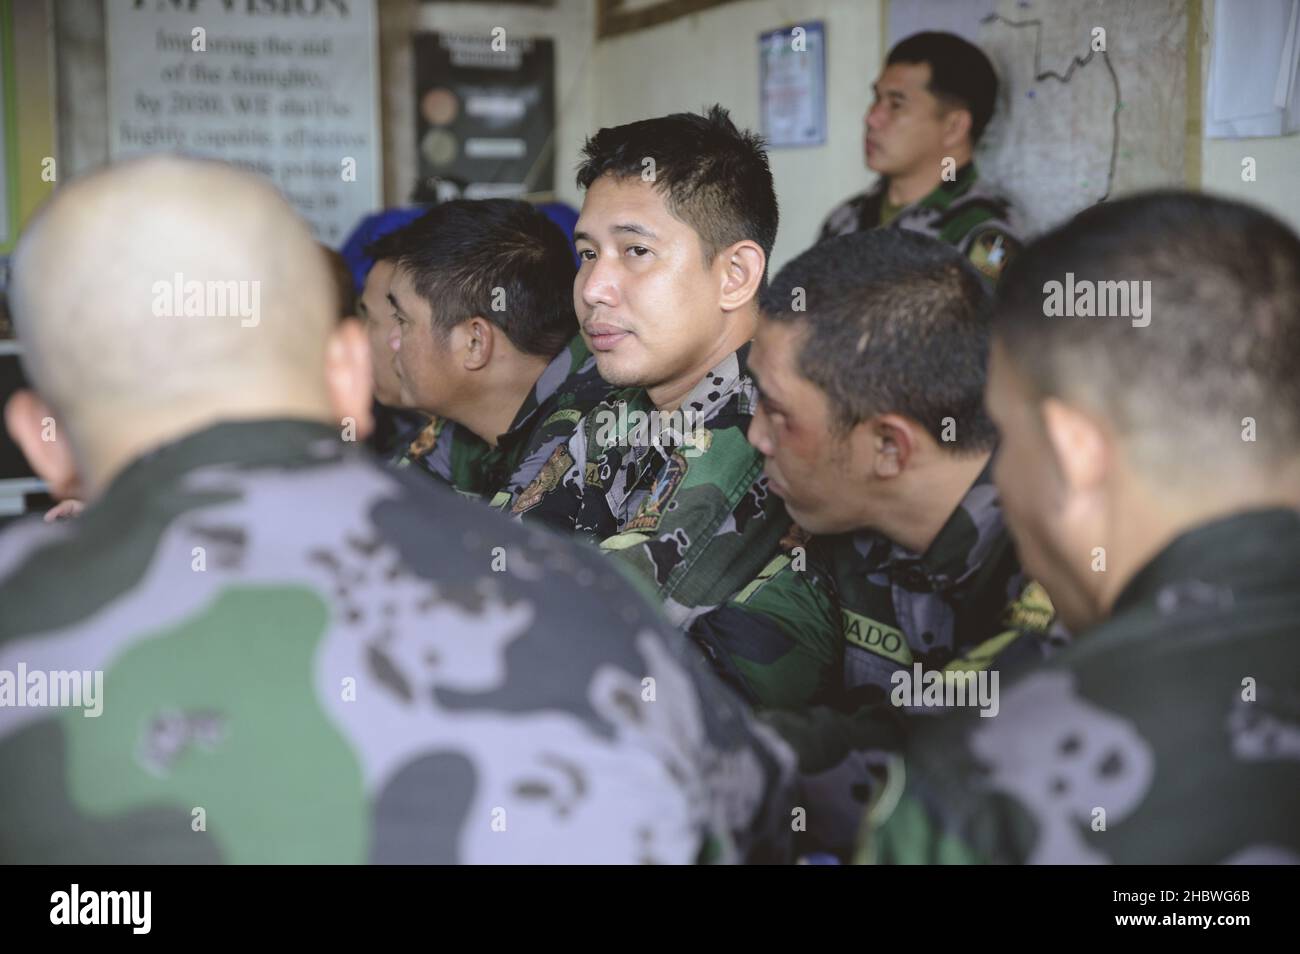 LA CARLOTA CITY, PHILIPPINES - Mar 01, 2019: The Filipino military personnel sitting in a meeting Stock Photo